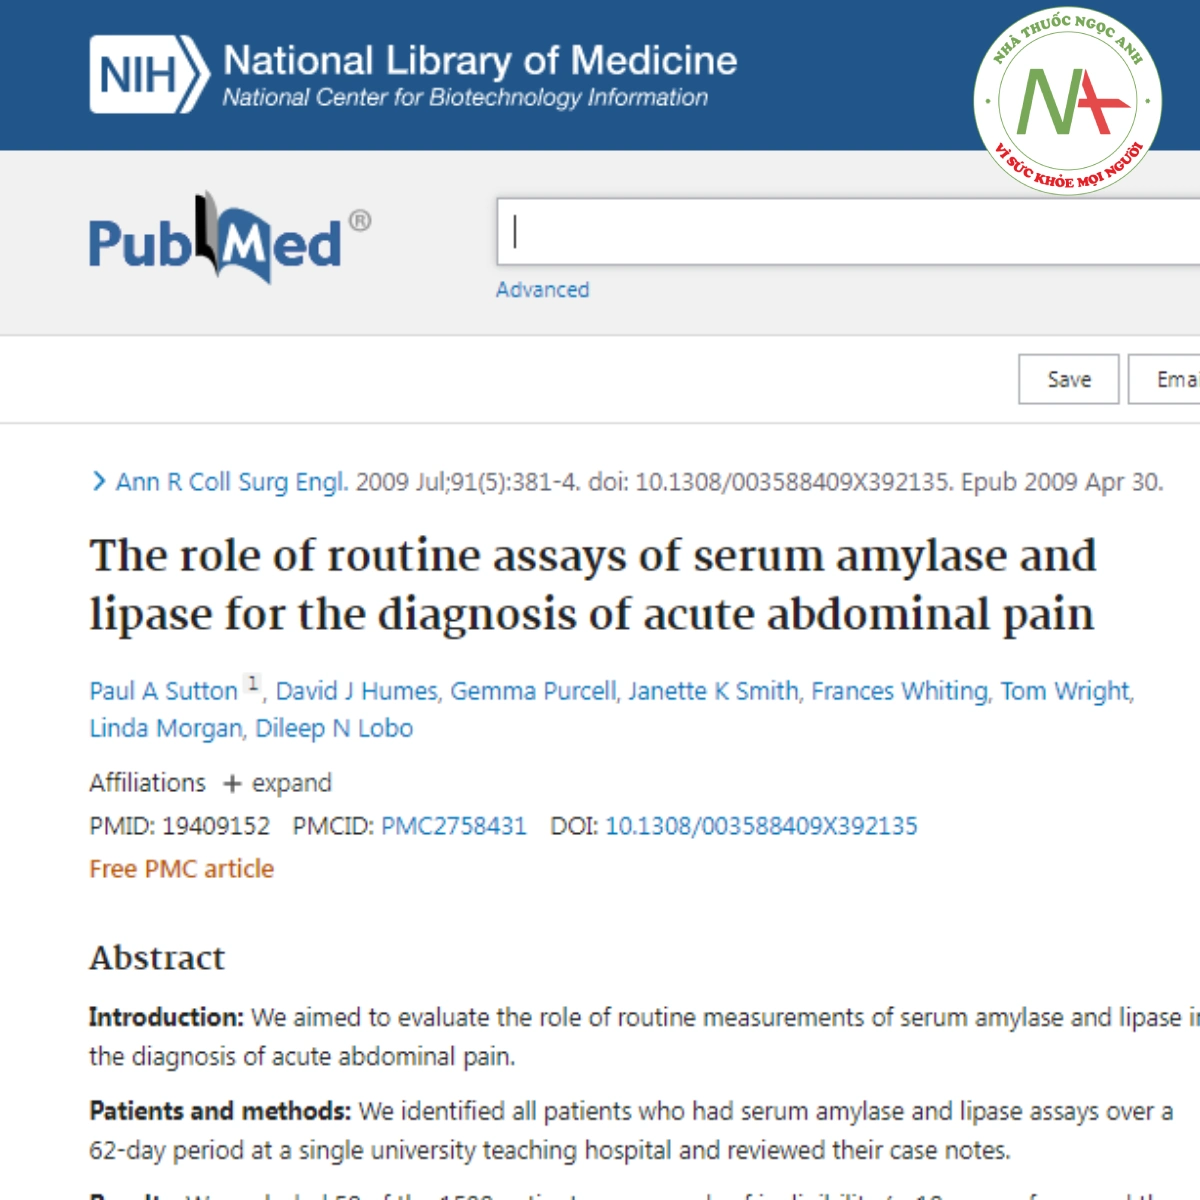 The role of routine assays of serum amylase and lipase for the diagnosis of acute abdominal pain